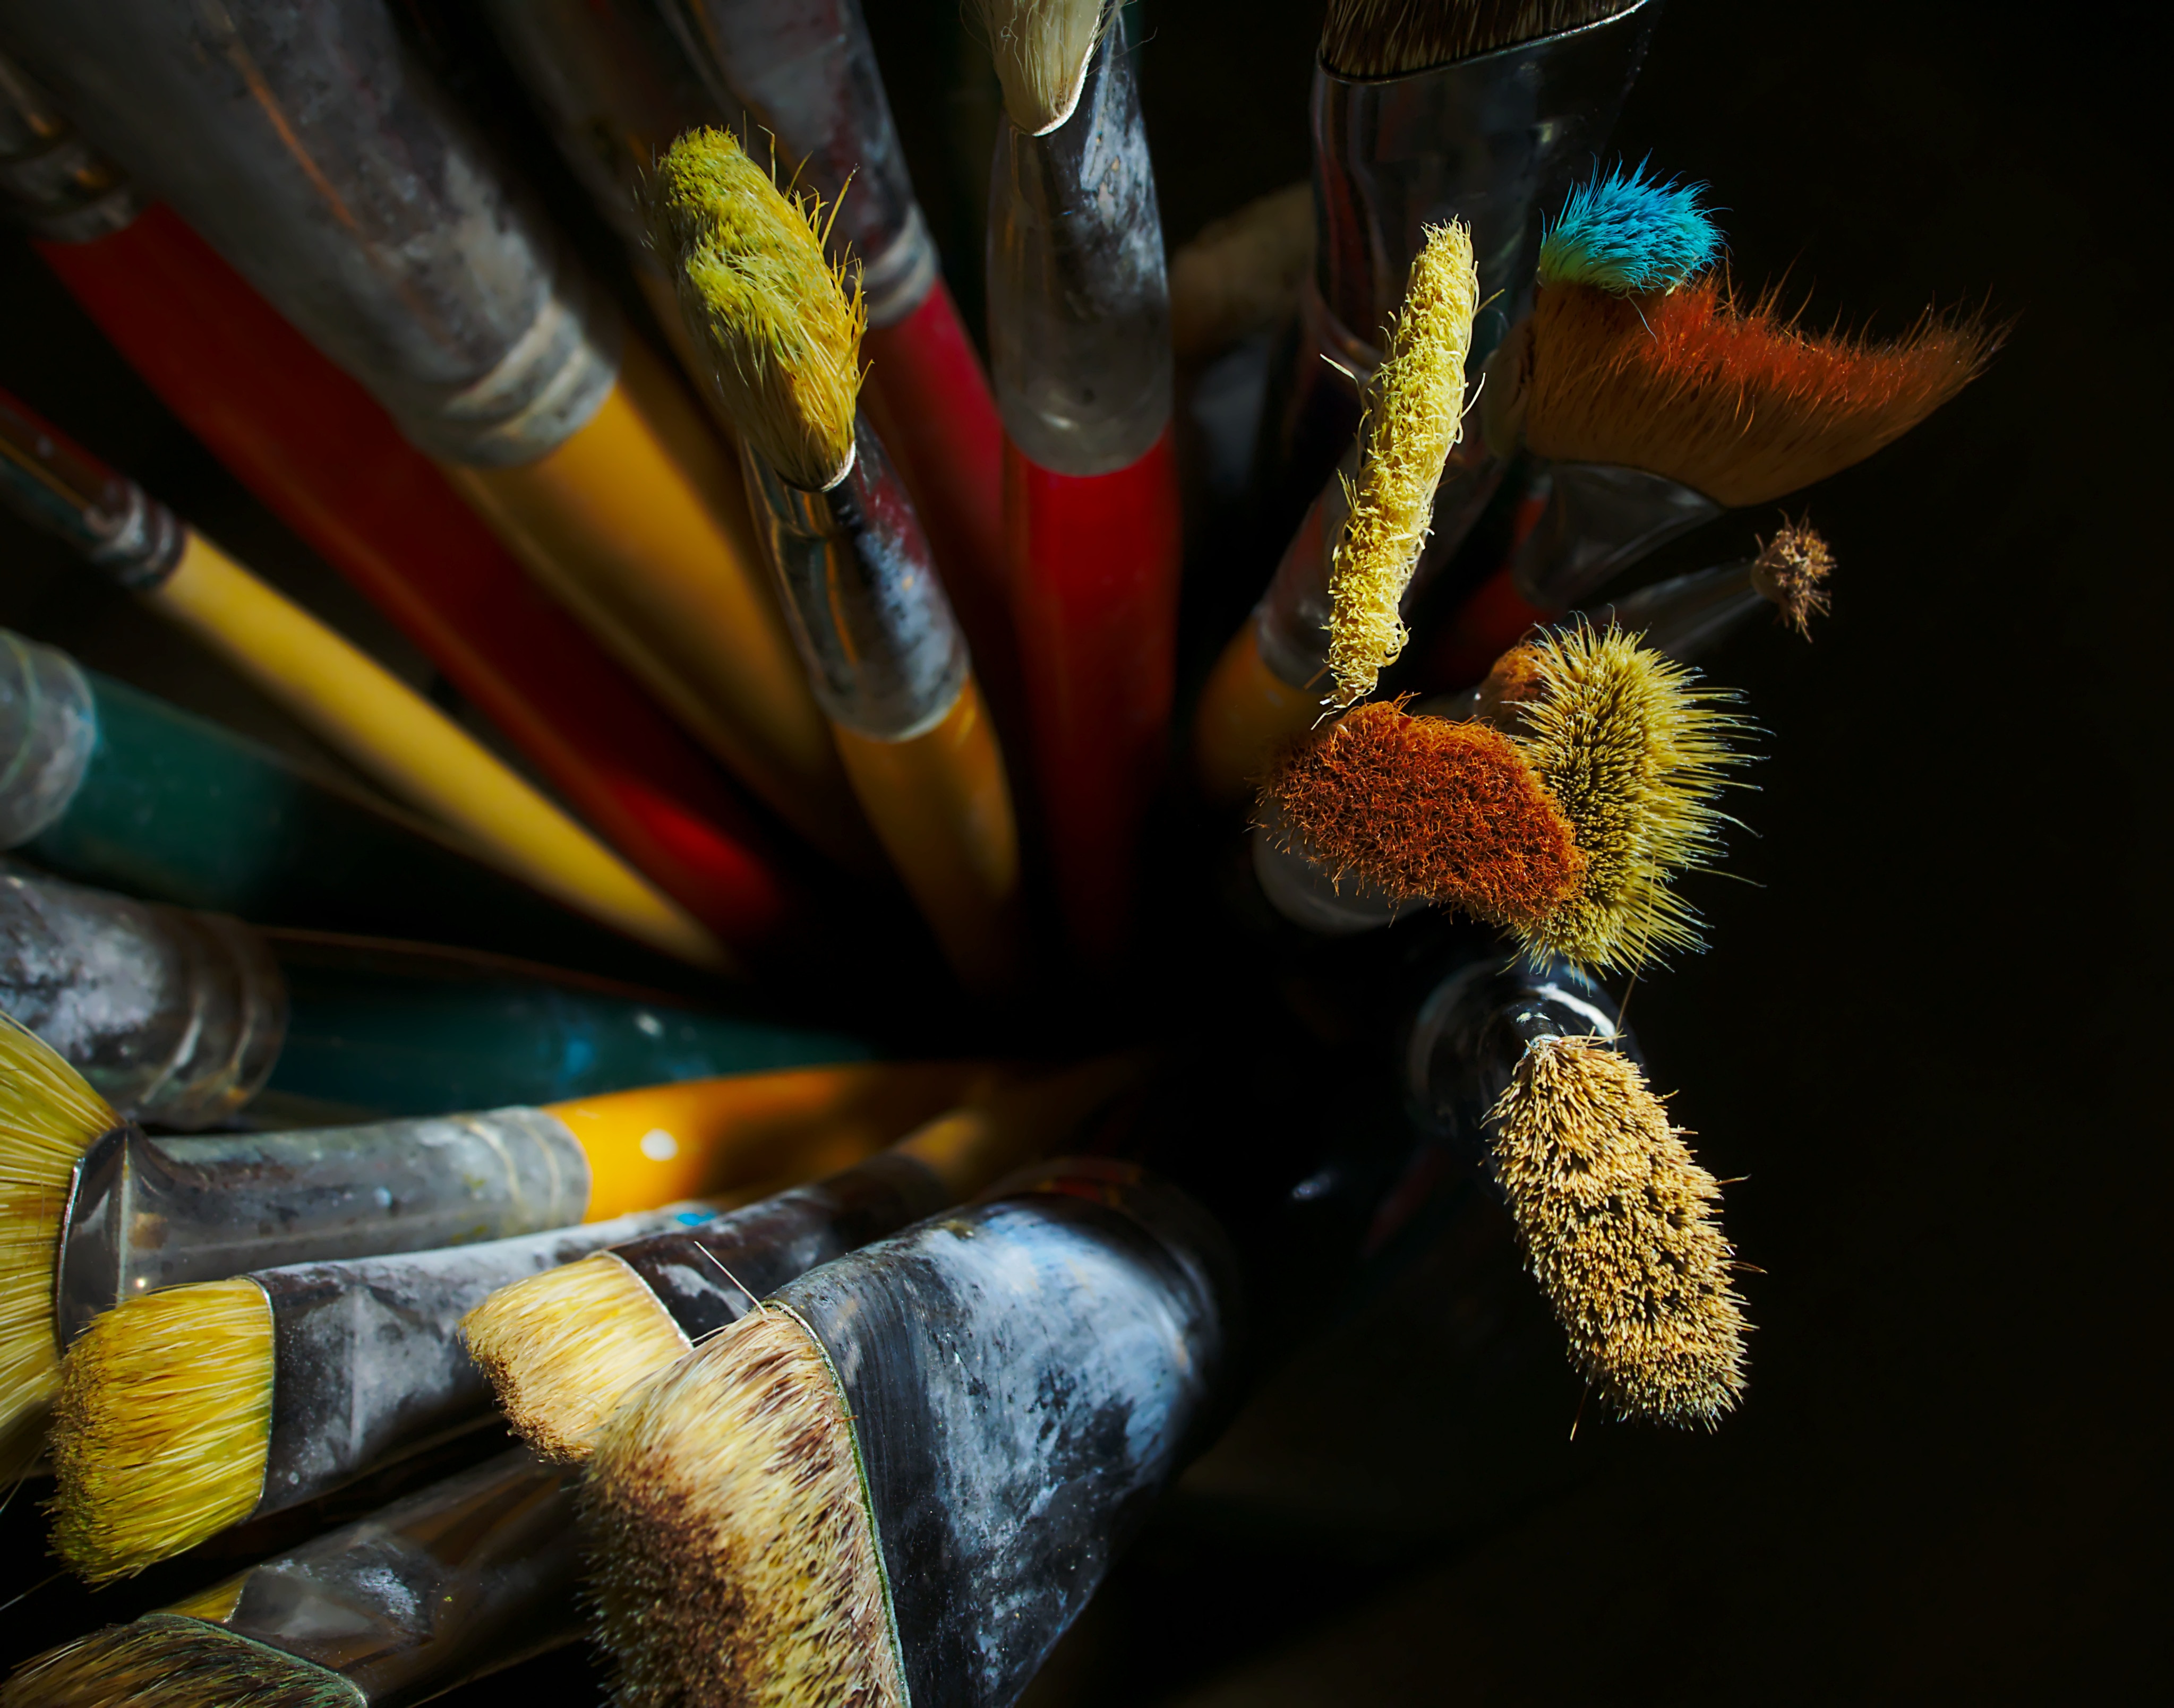 painting, brushes, miscellanea, miscellaneous, wood, wooden, multicolored, motley, drawing, tassels